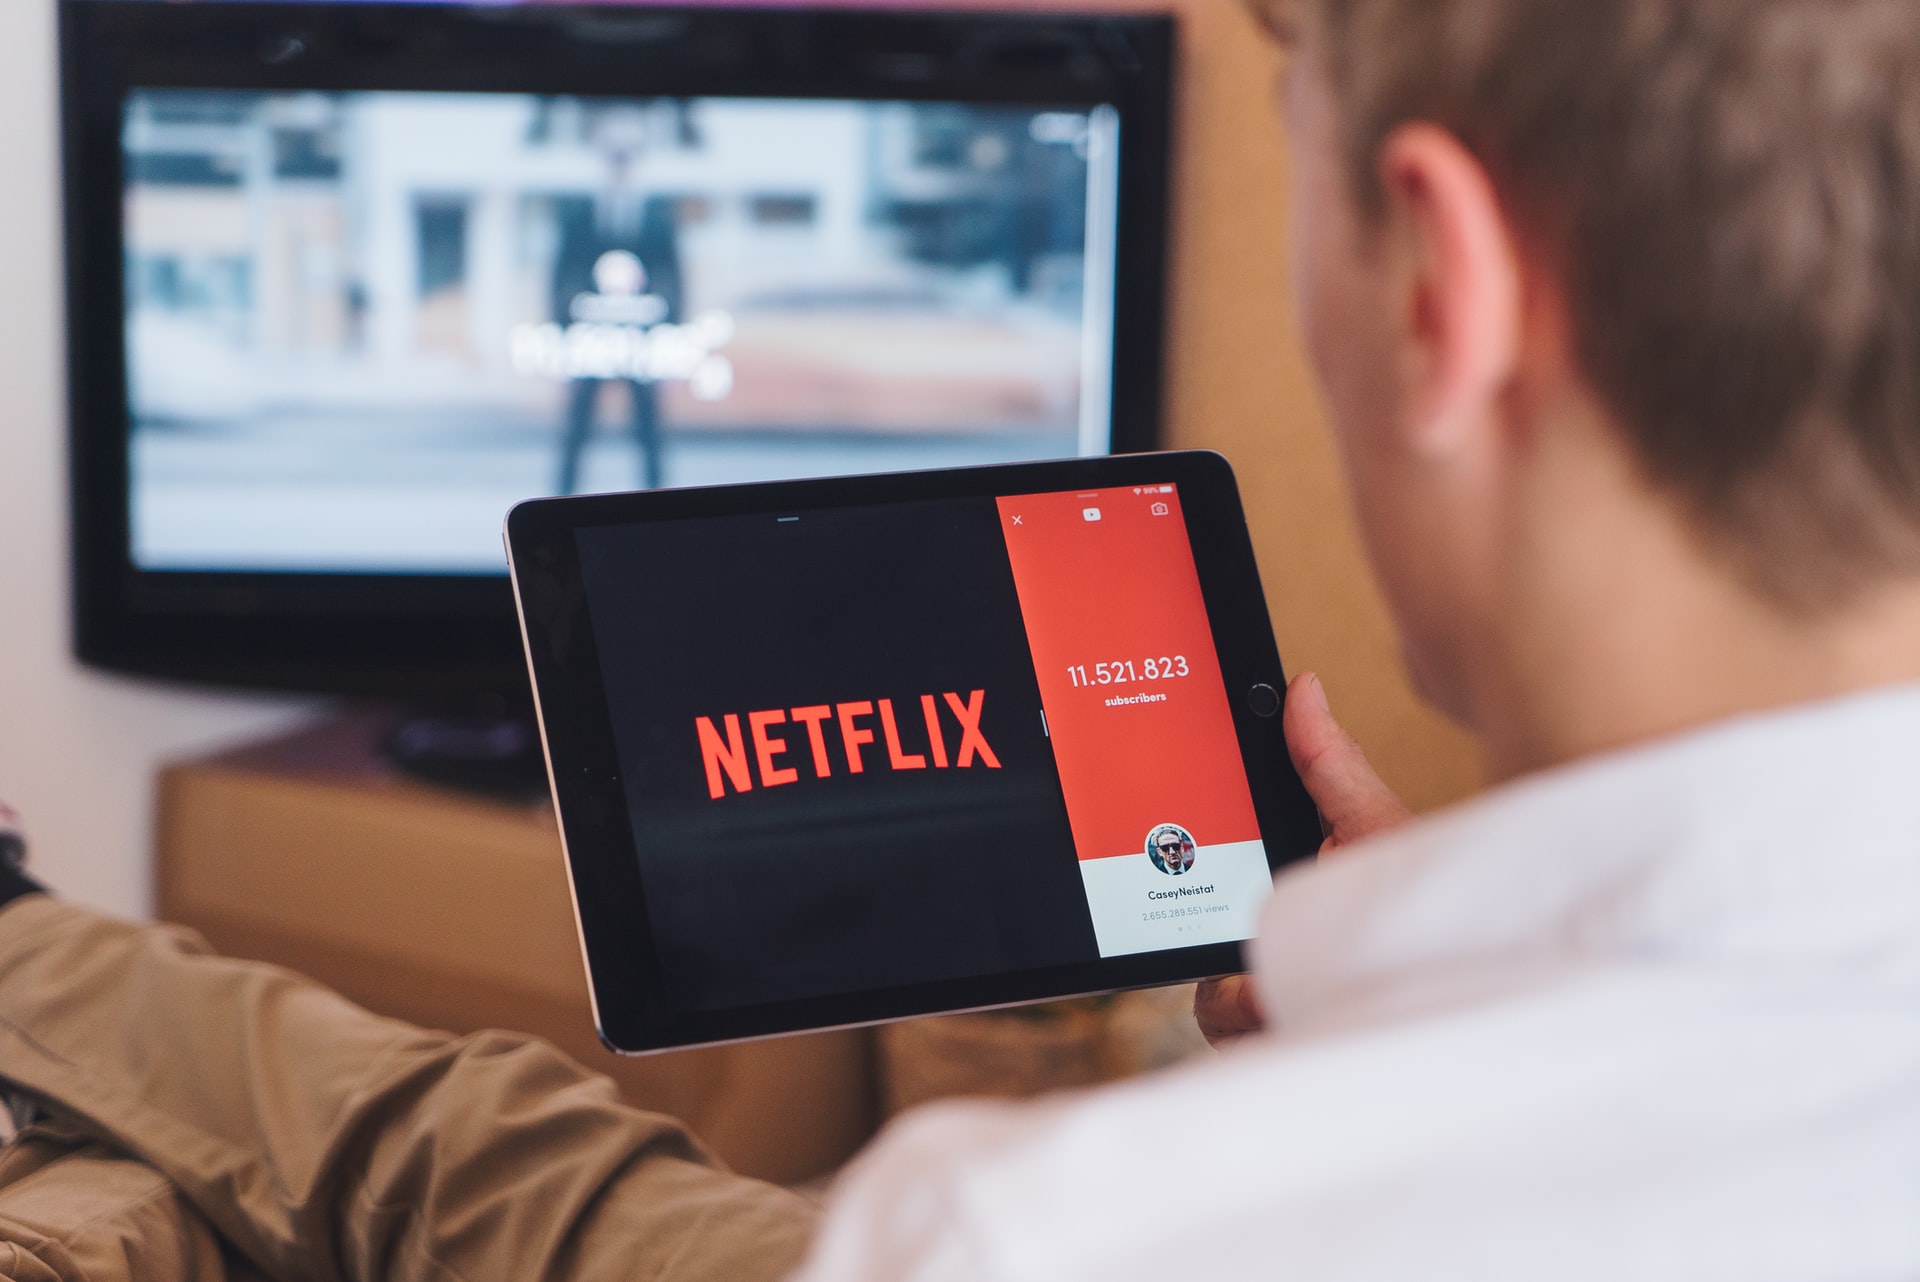 Netflix is partnering with Microsoft for its new ad-supported tier